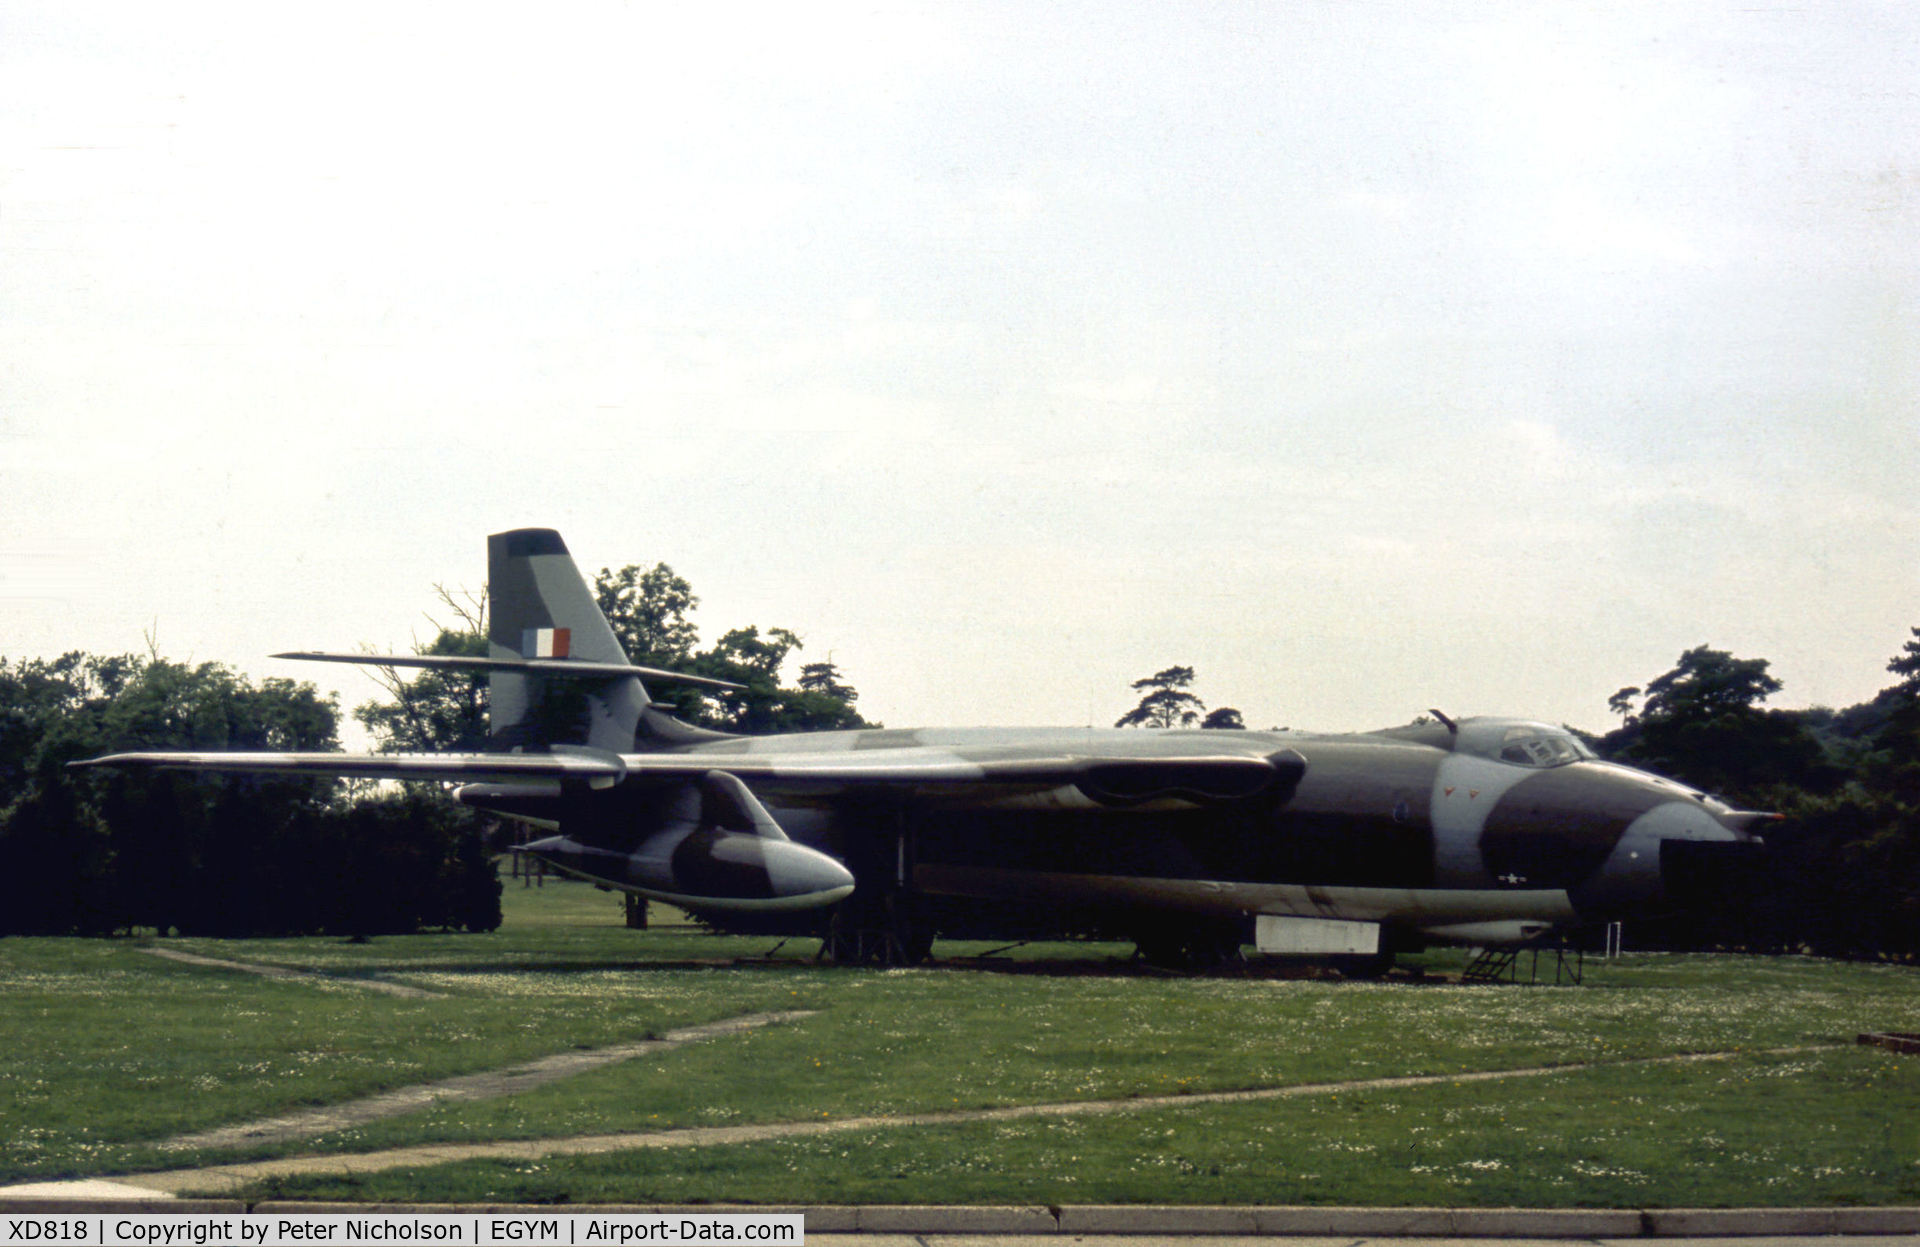 XD818, 1956 Vickers Valiant BK.1 C/N Not Found XD875, Valiant B(K).1 of 49 Squadron with RAF maintenance serial 7894M as gate guardian at RAF Marham in the Summer of 1978 before transfer to the RAF Museum firstly at Hendon and then Cosford.